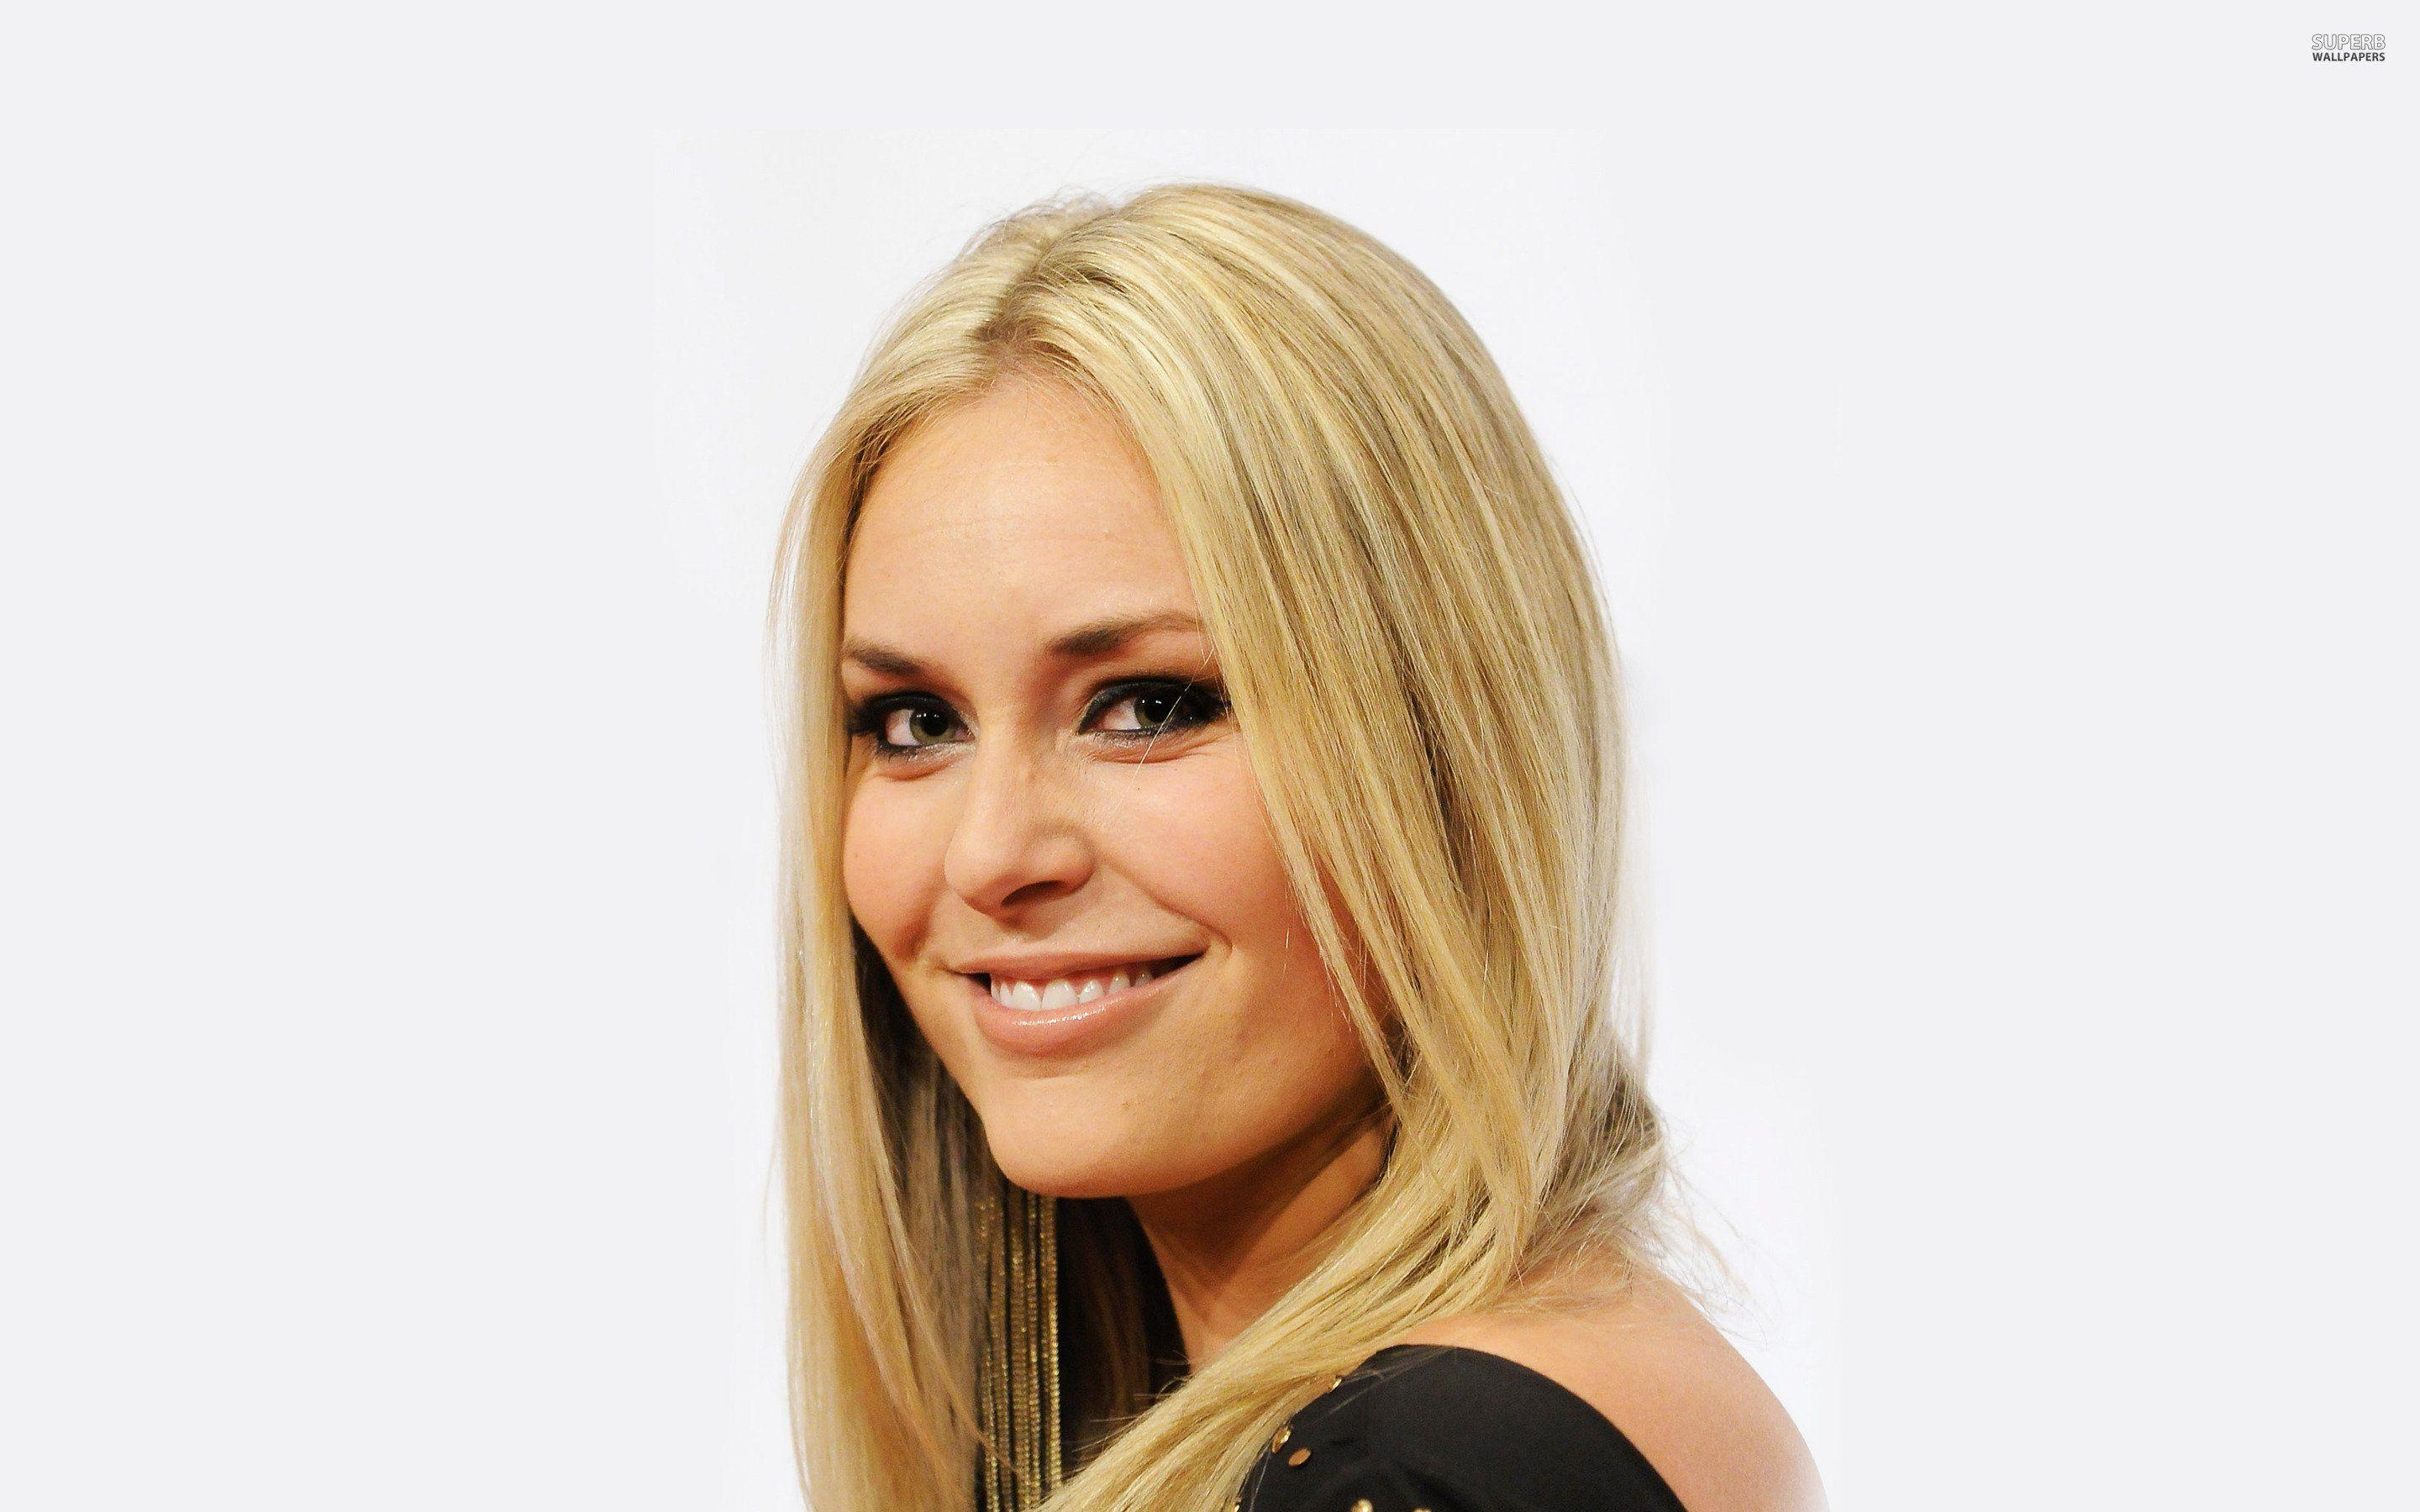 Lindsey Vonn Wallpaper Image Photo Picture Background